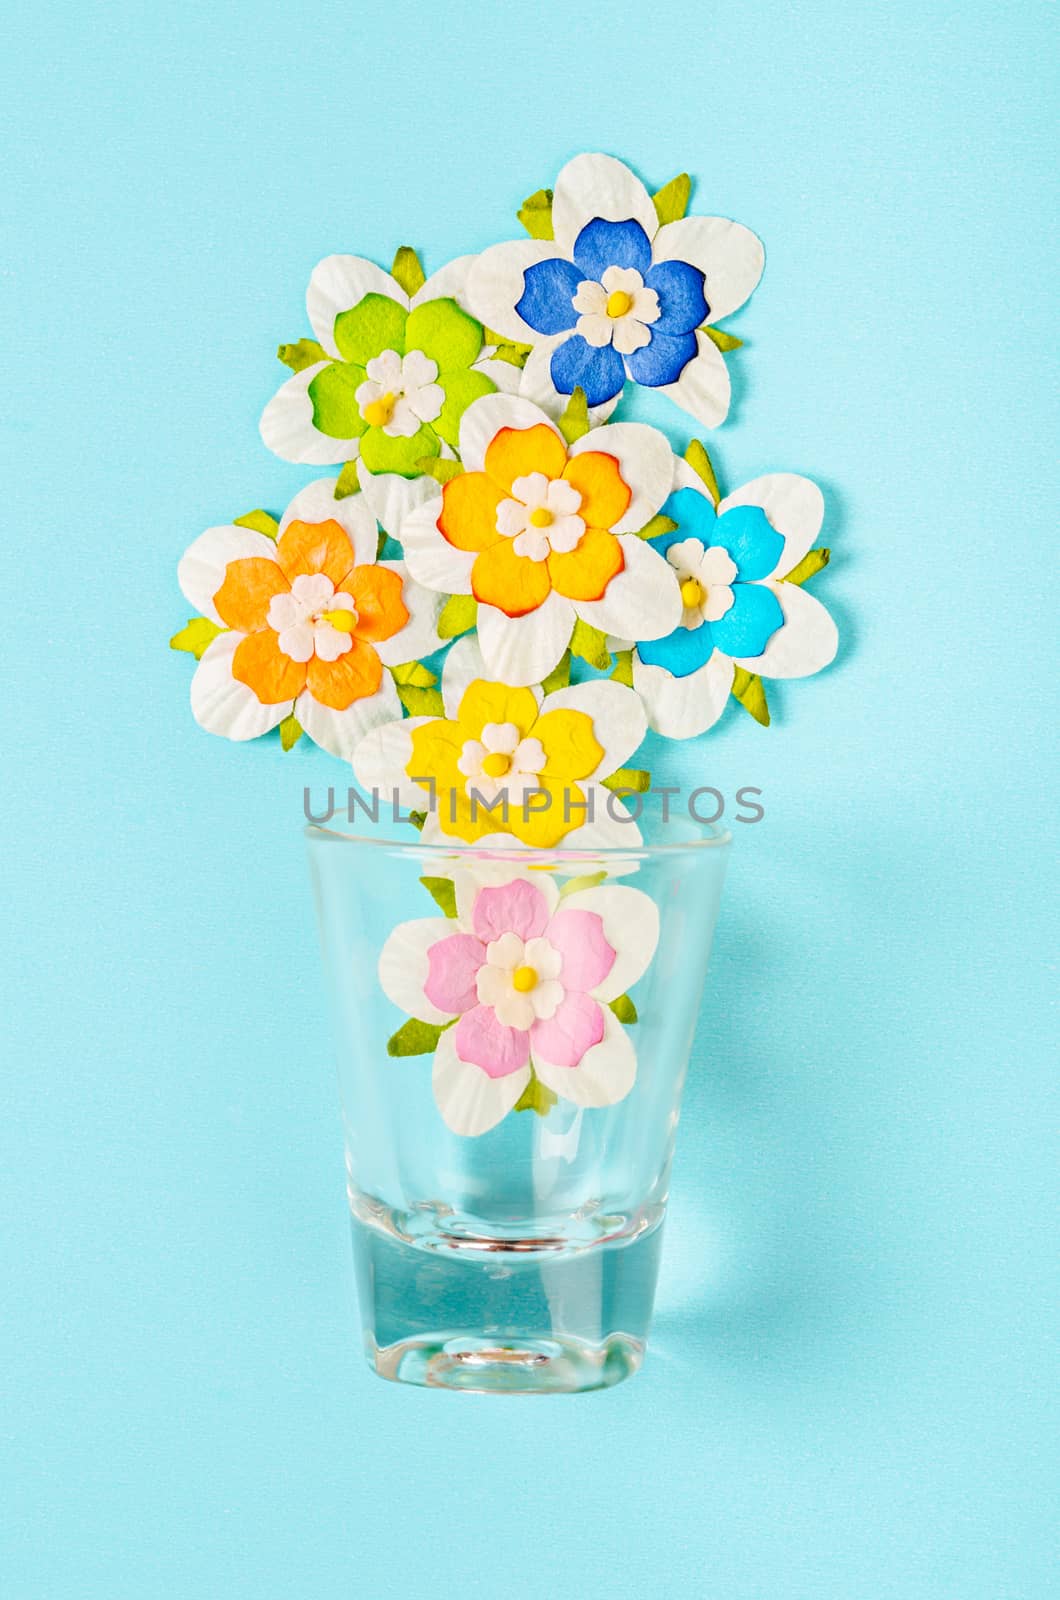 Romantic beautiful artificial colorful flowers with glass on blue background.